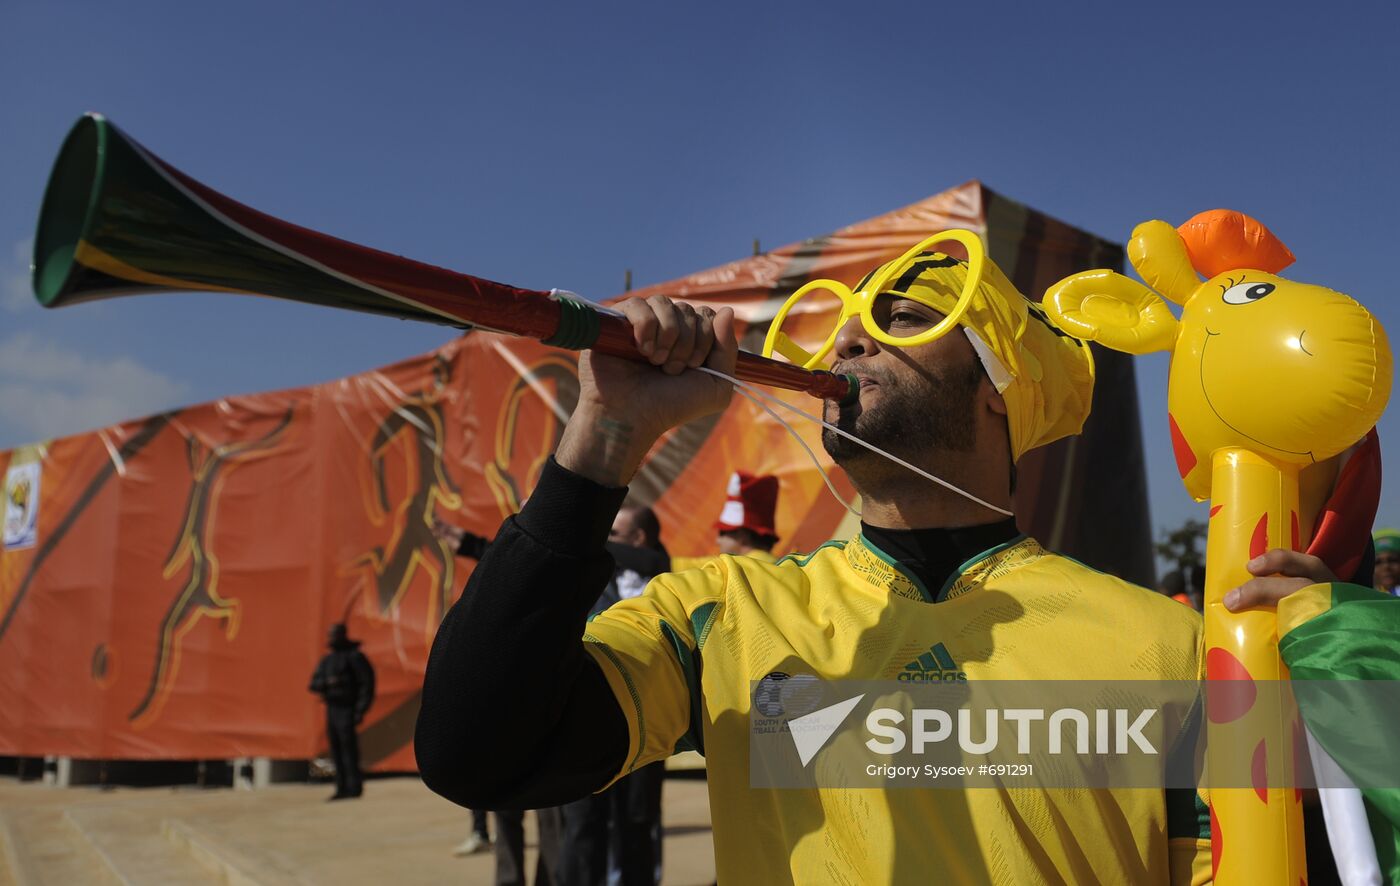 Preparations for 2010 FIFA World Cup opening in South Africa